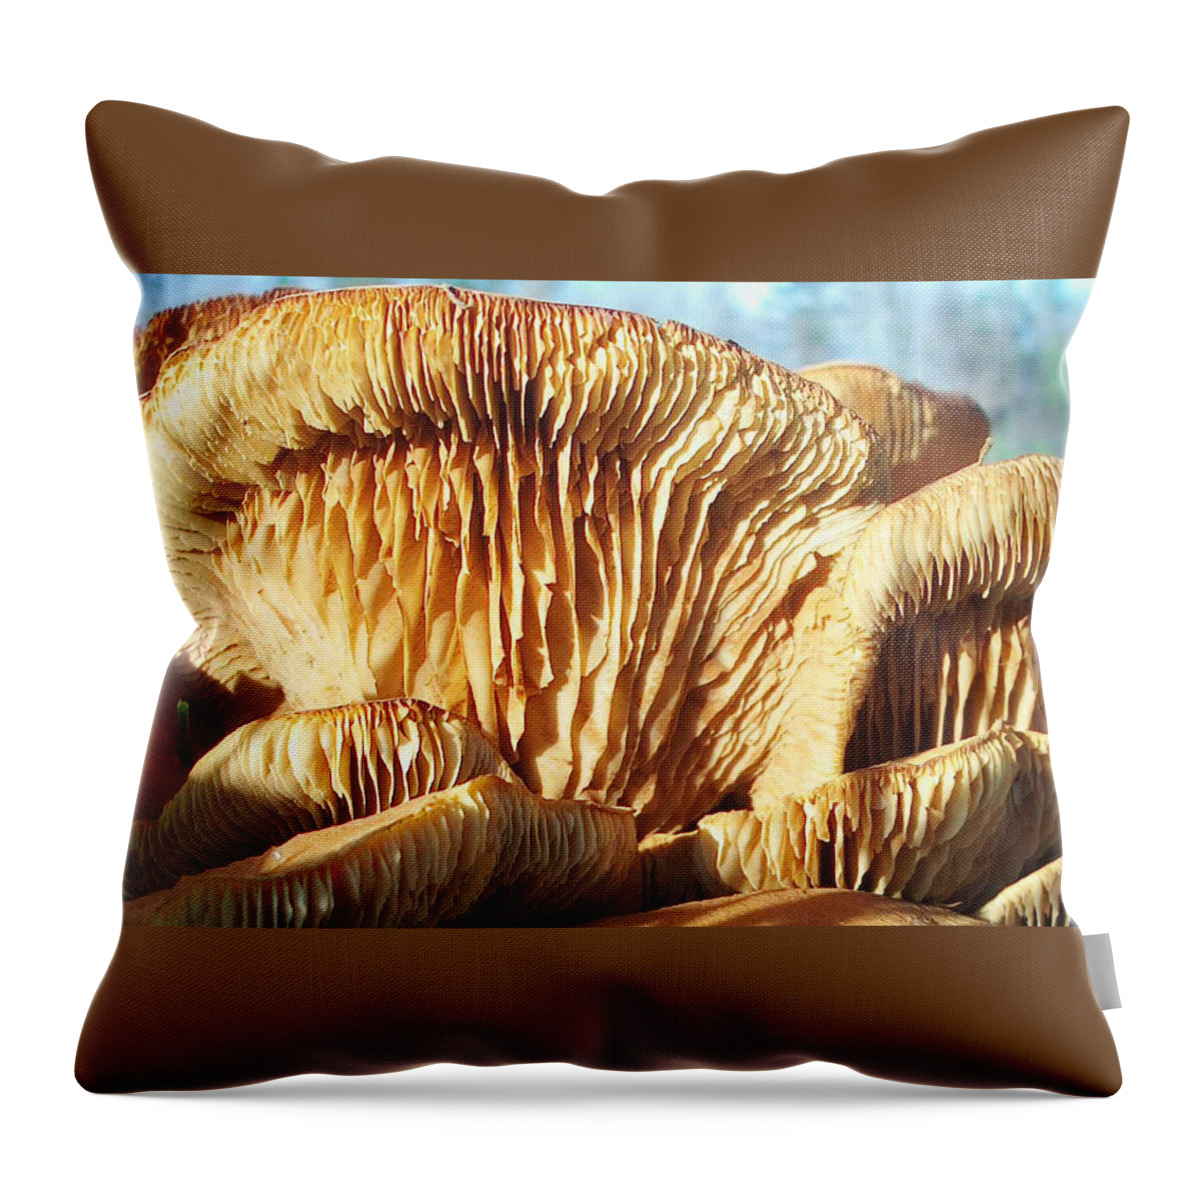 Mushrooms Throw Pillow featuring the photograph Mushrooms by Jan Marvin by Jan Marvin